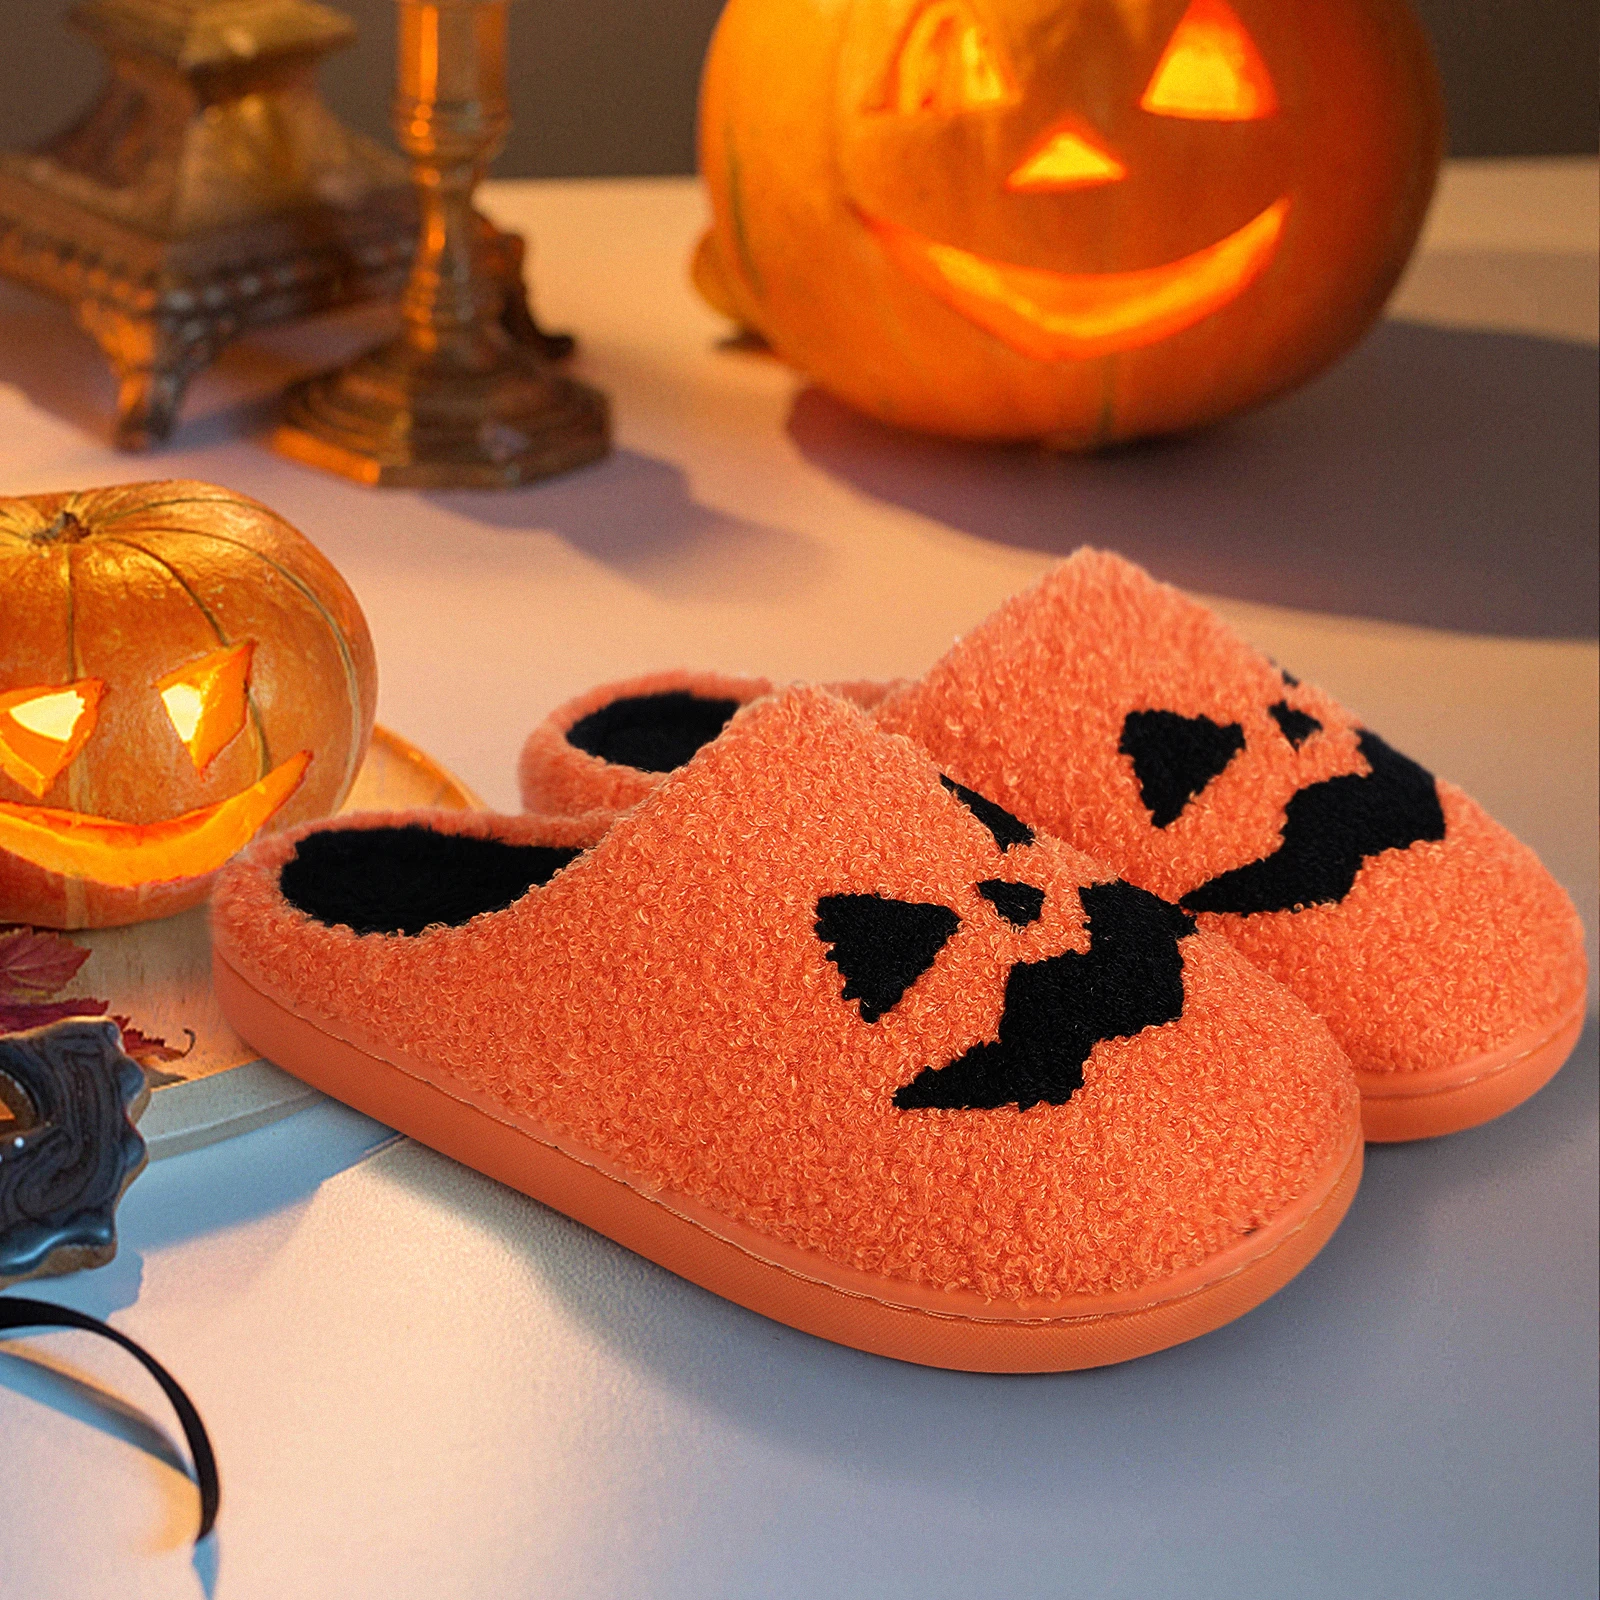 

Ghost Face Slippers Halloween Slippers Pumpkin Slippers Men Flat Soft Plush Cozy Indoor Fuzzy Women House Shoes Fashion Gift Hot